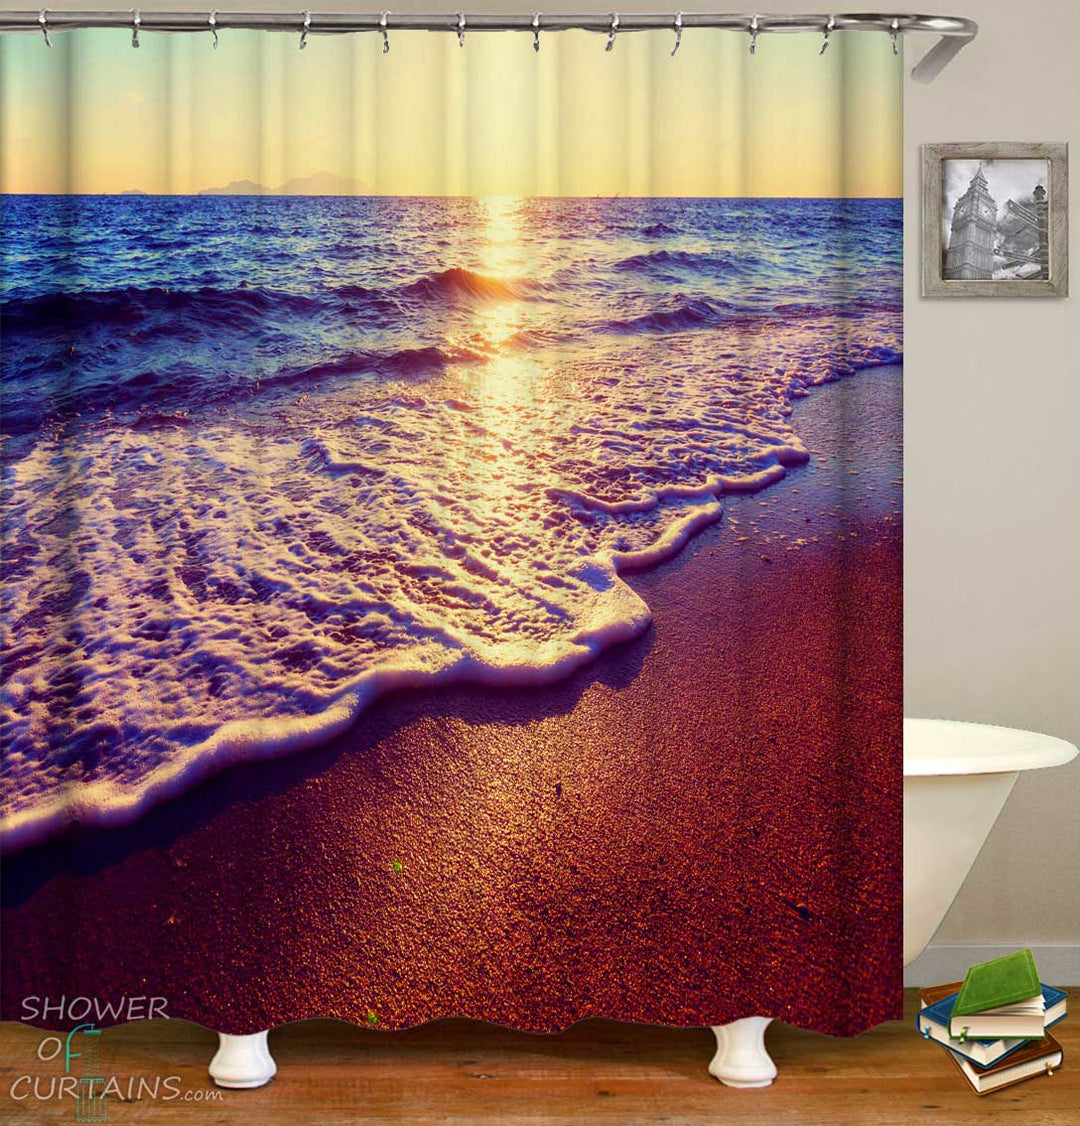 Shower Curtains with The Ocean at Sunset